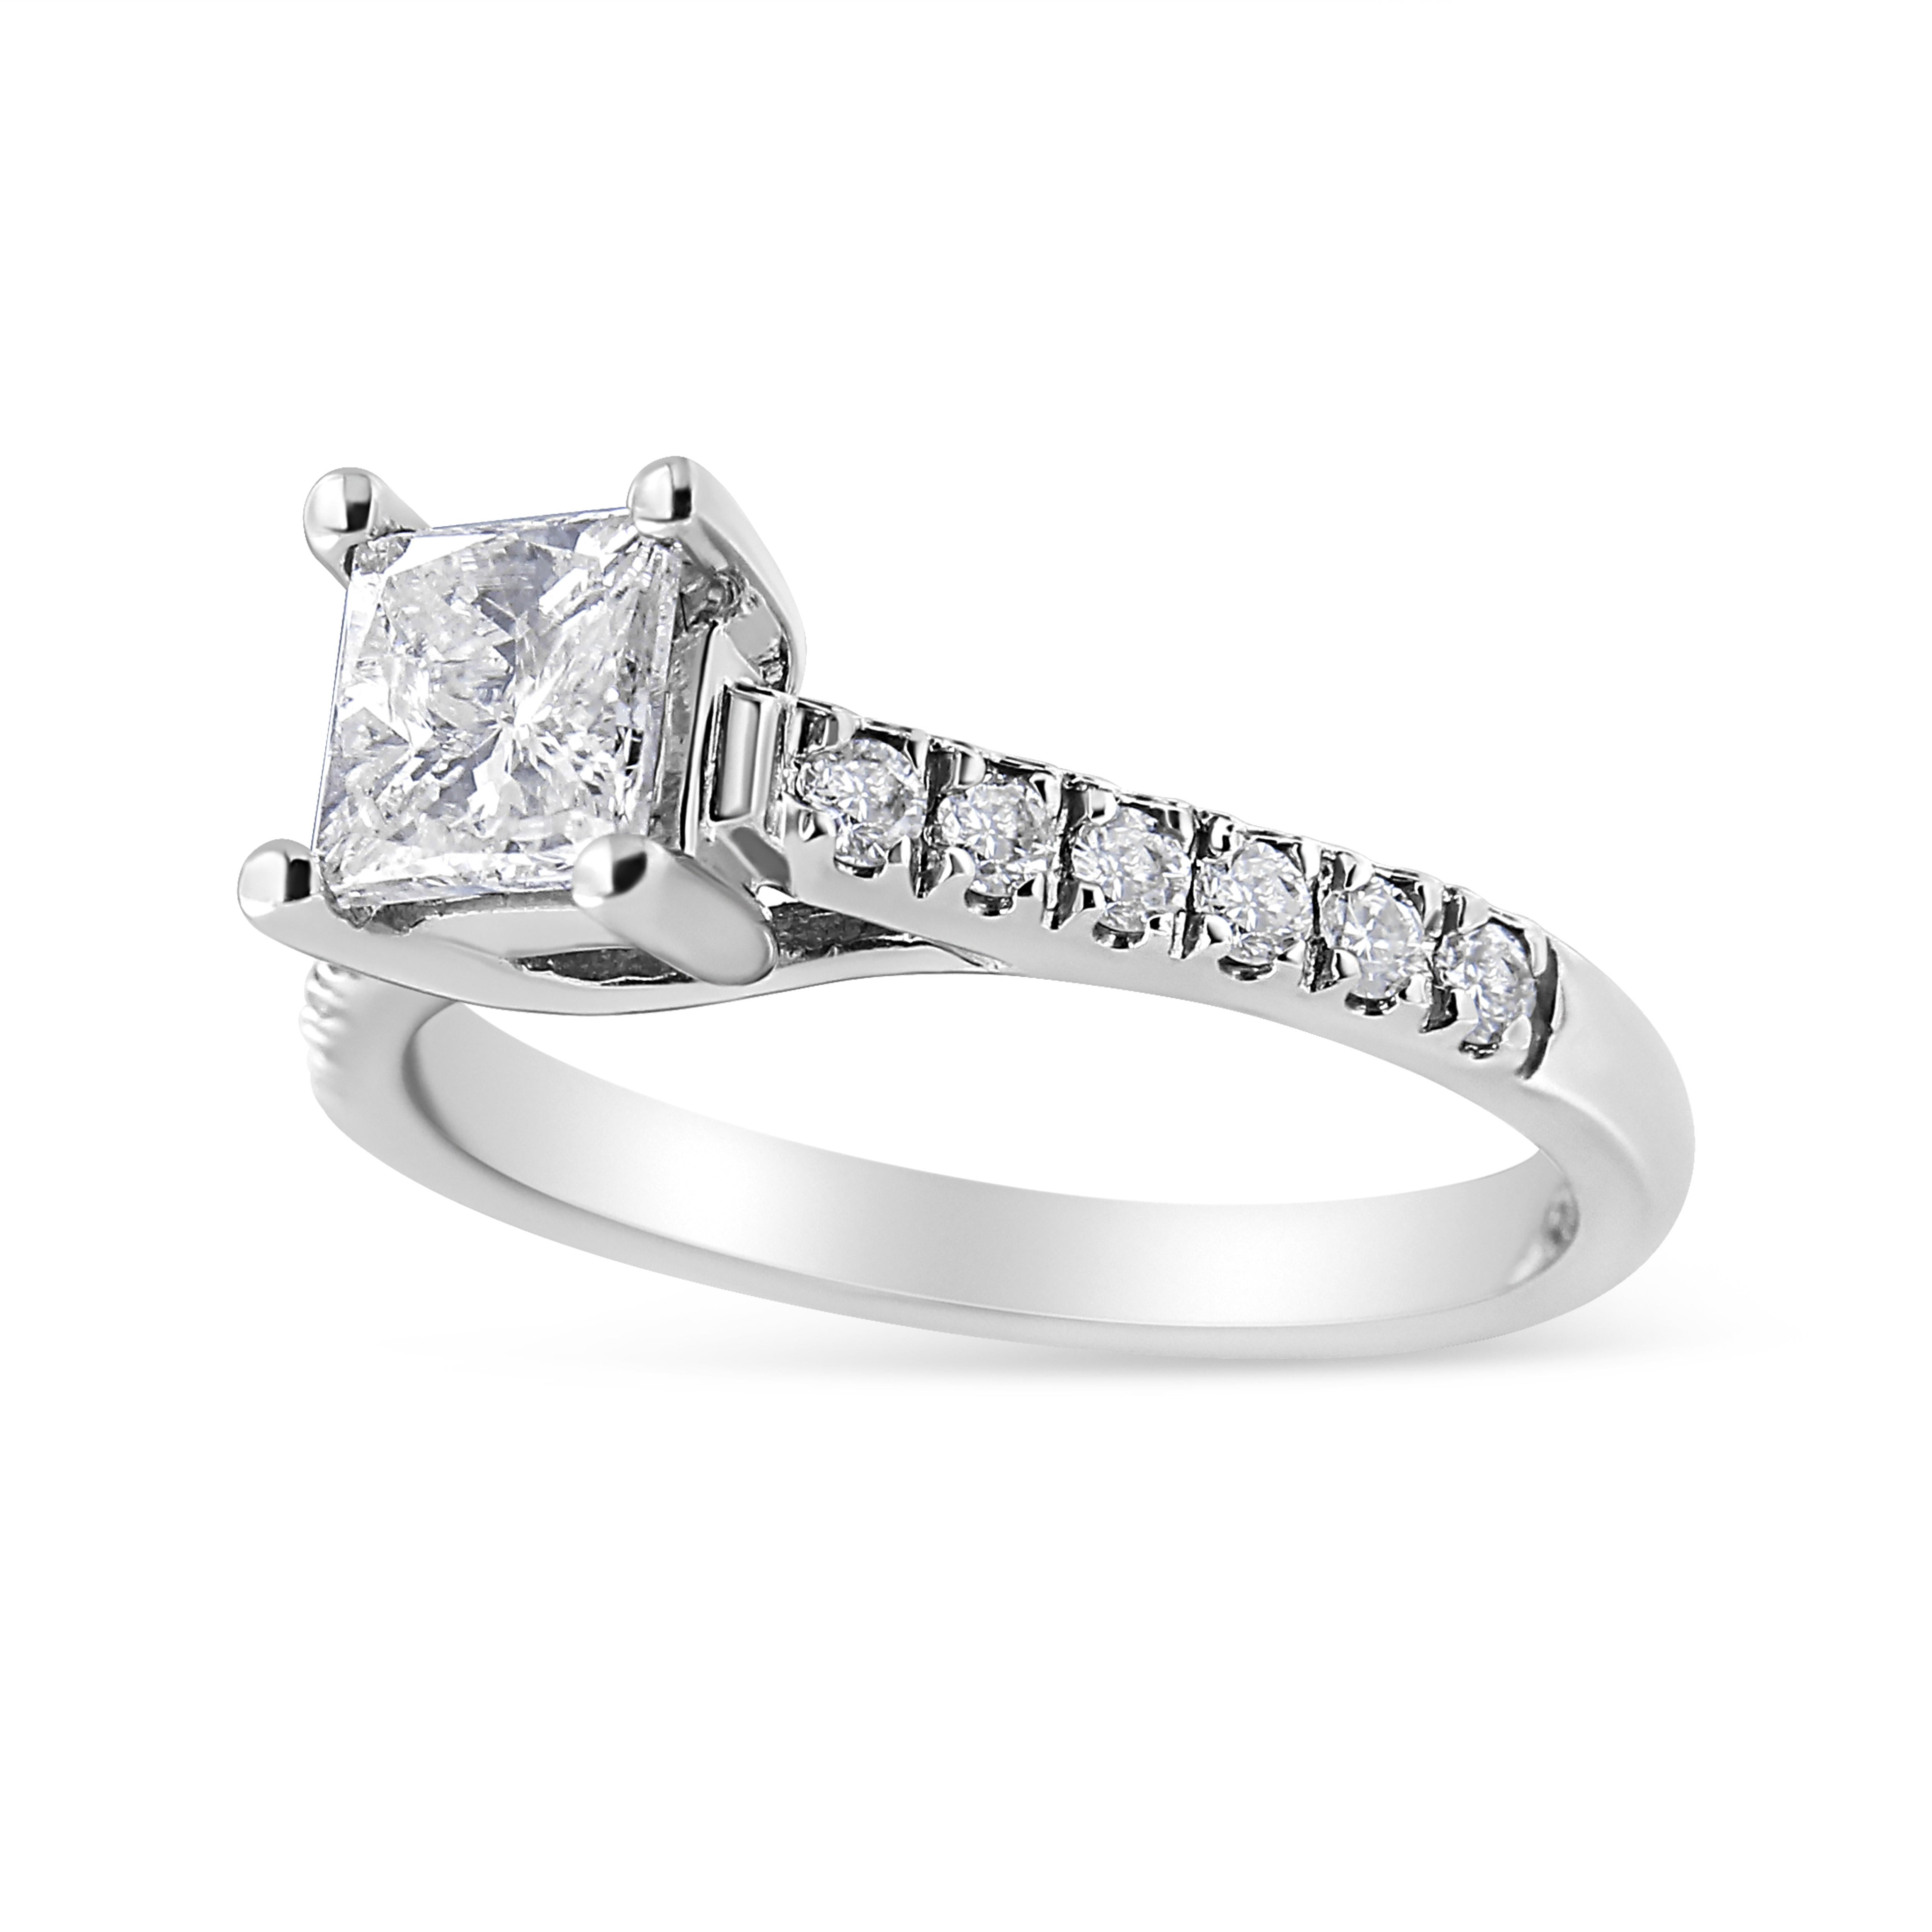 Express all the love you hold in your heart for that special someone with this shimmering diamond engagement ring. Eye-catchingly beautiful, this 14k white gold ring sparkles with 1 1/5 carats of natural, gleaming diamonds. 4 Prongs hold a stunning